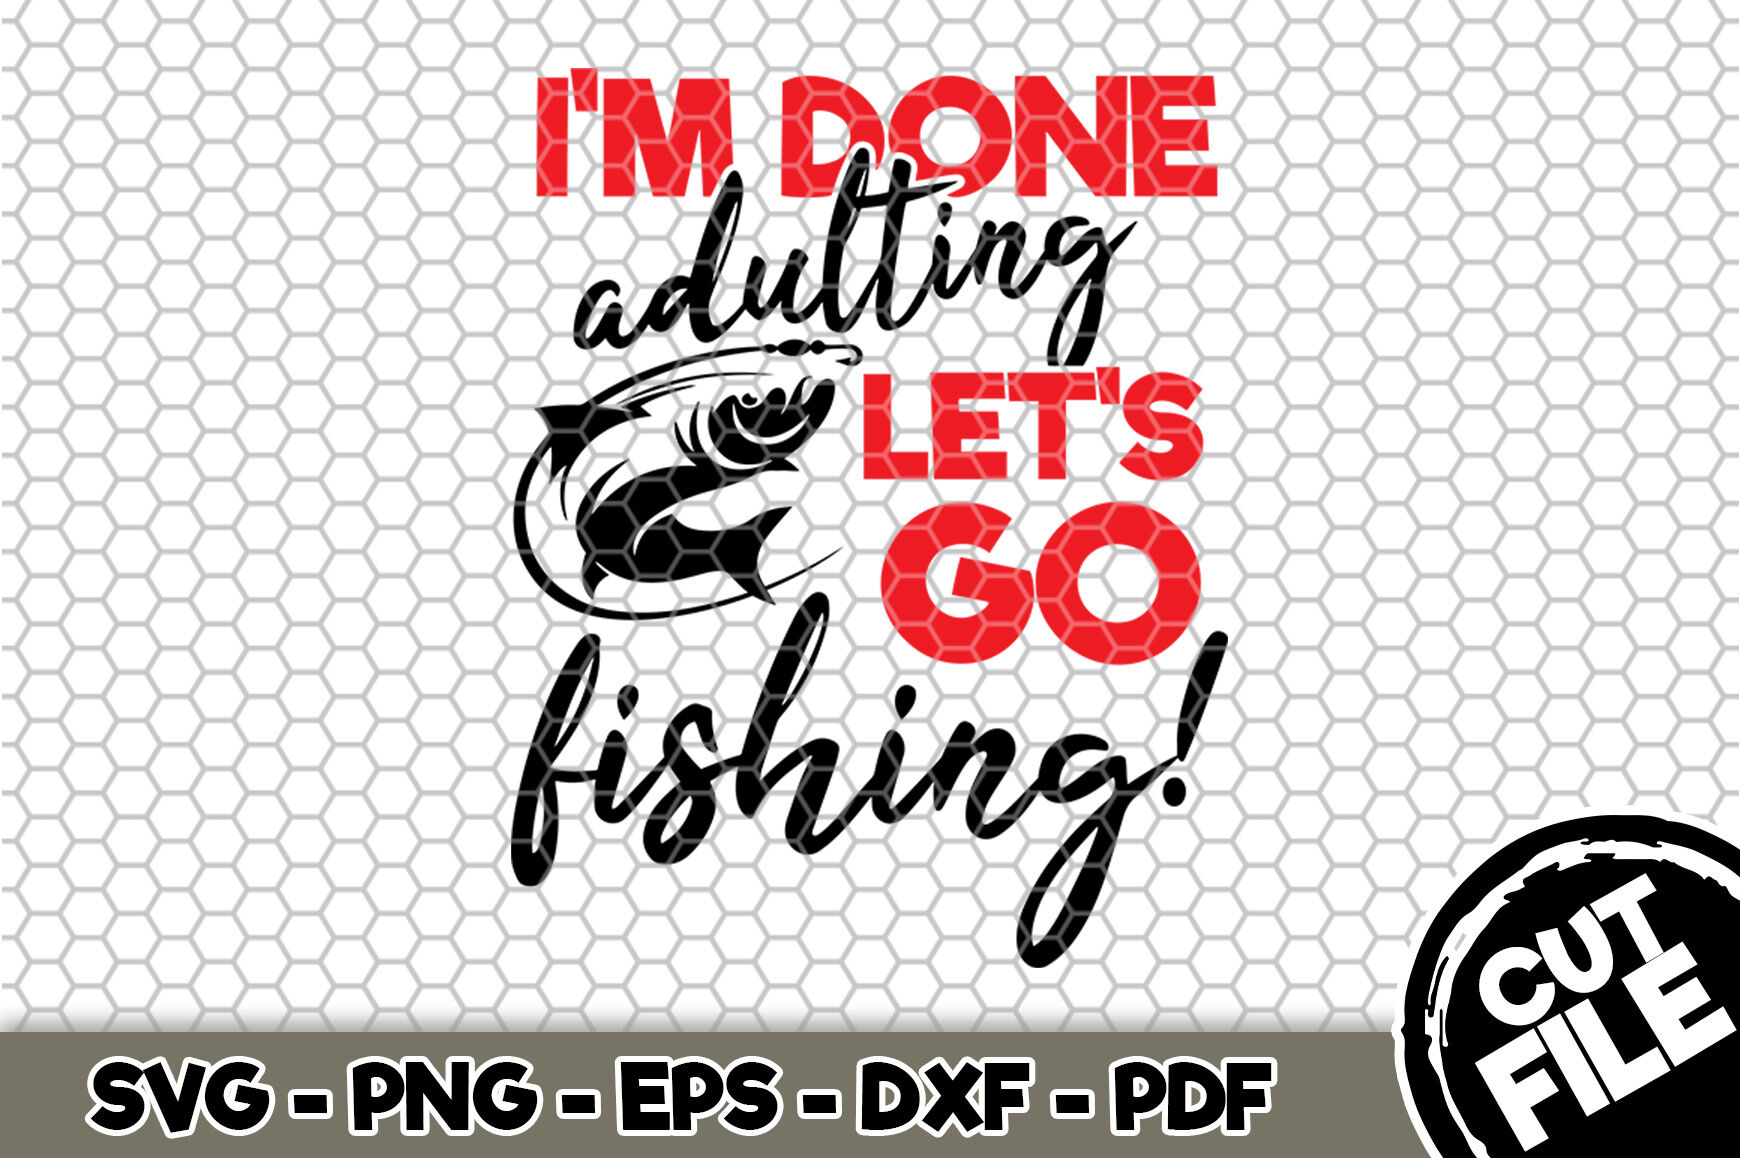 I'm Done Adulting Let's Go Fishing! SVG Cut File 082 By SvgArtsy